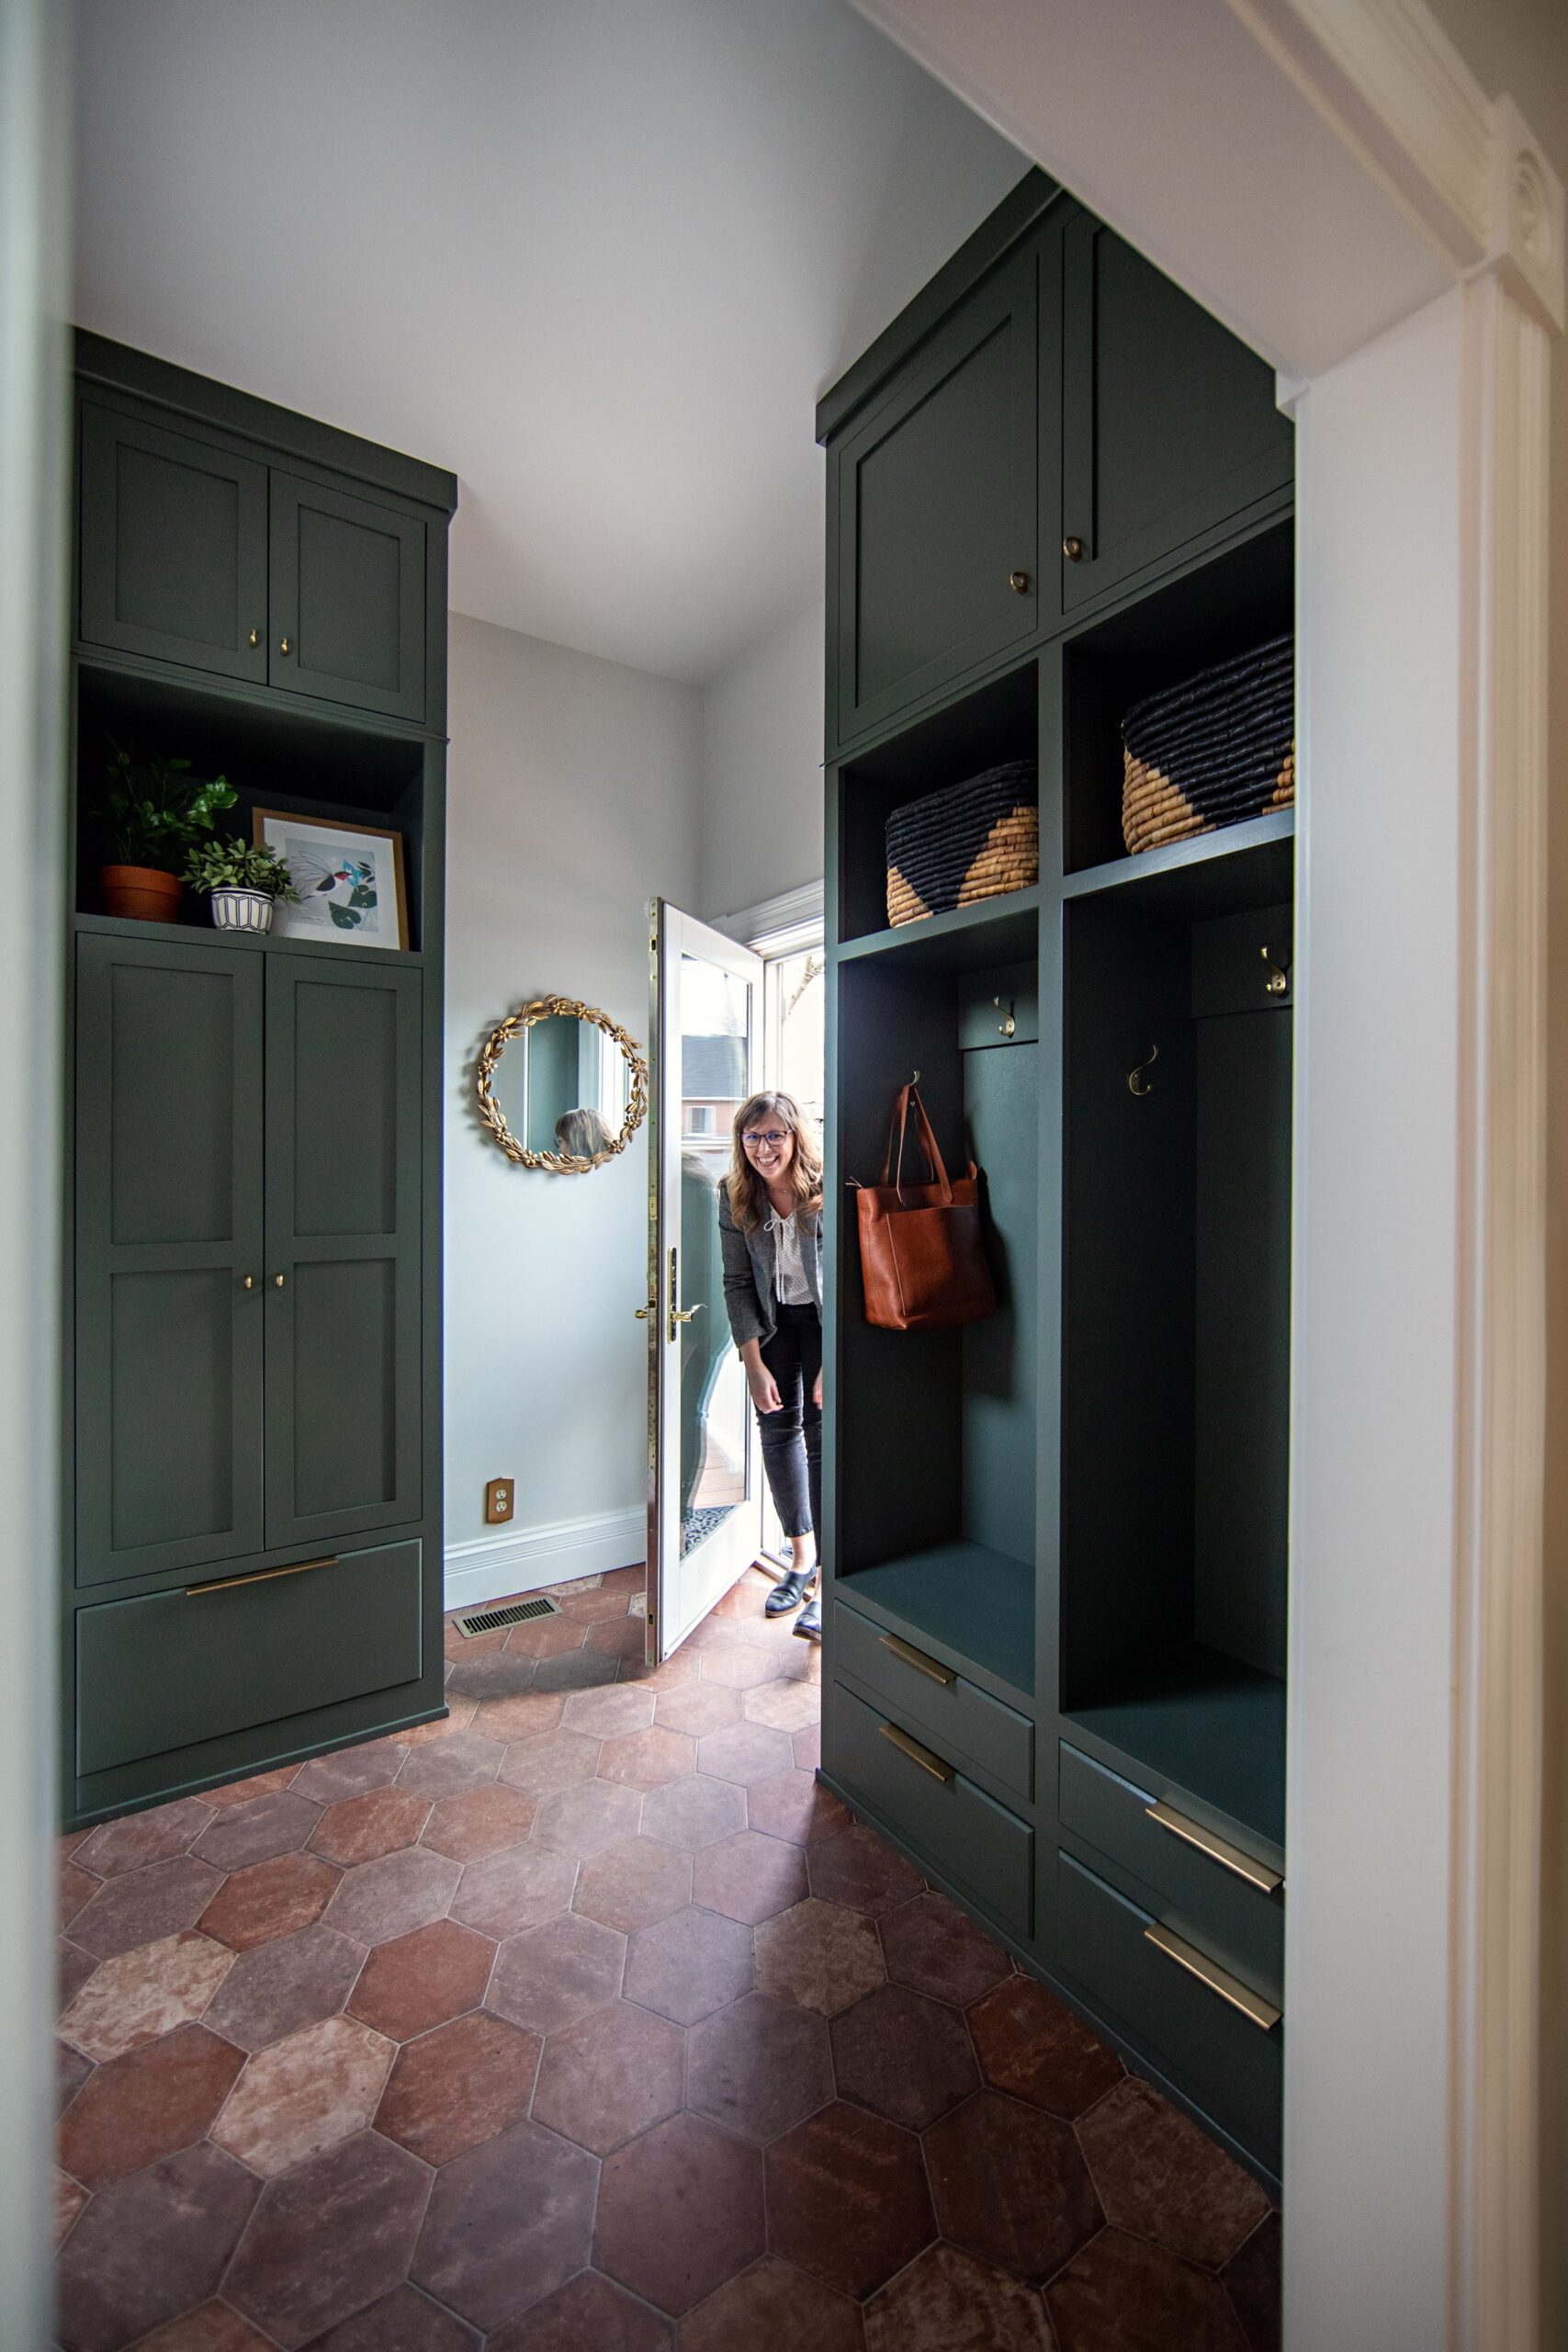 Custom cabinetry for mudroom